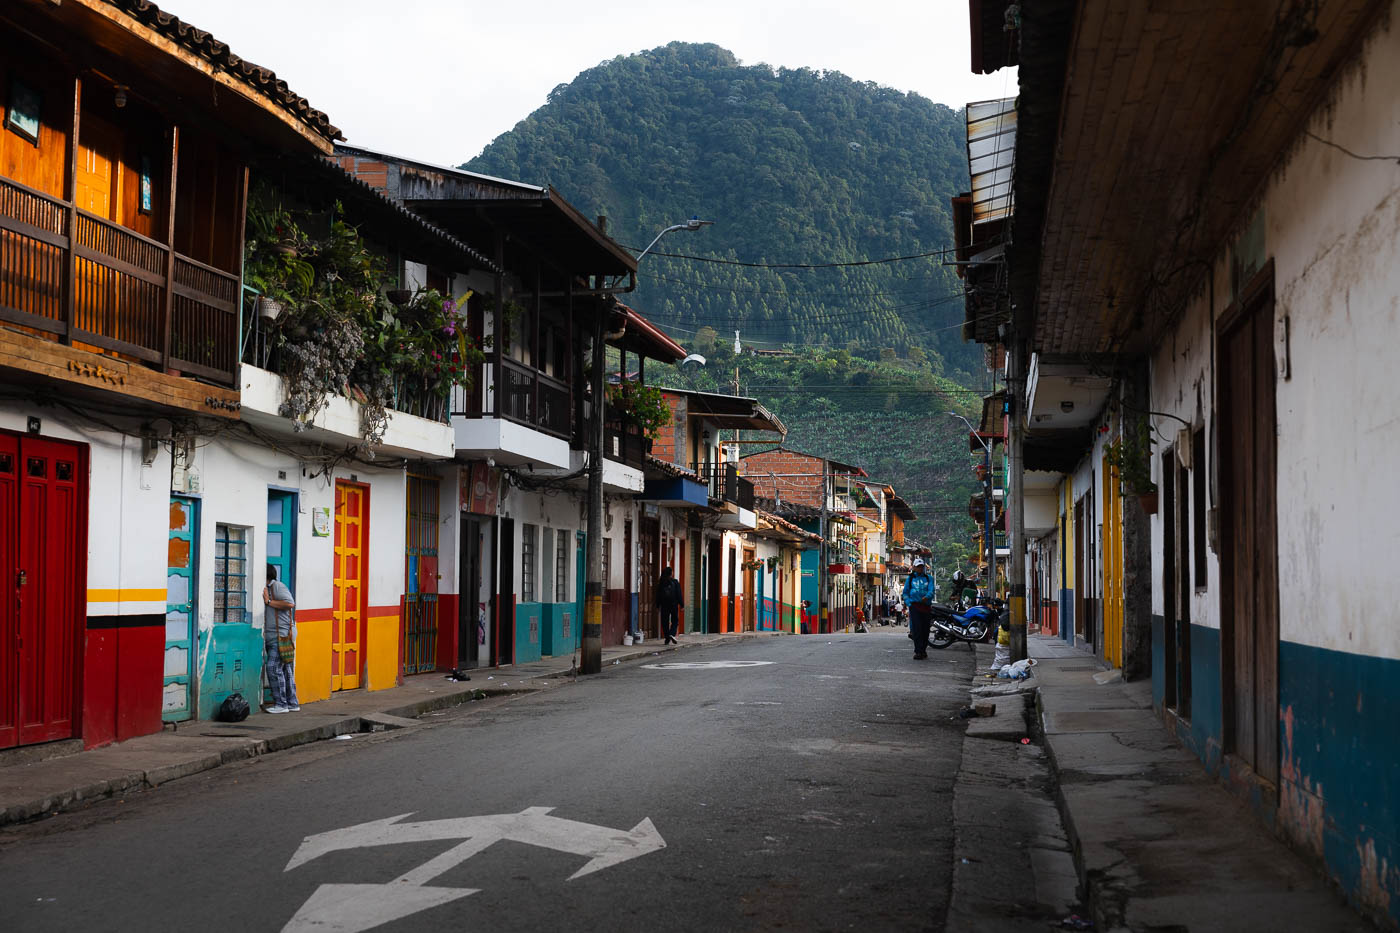 An empty but colourful Jardin street while locals go about their day with mountains in the distance.